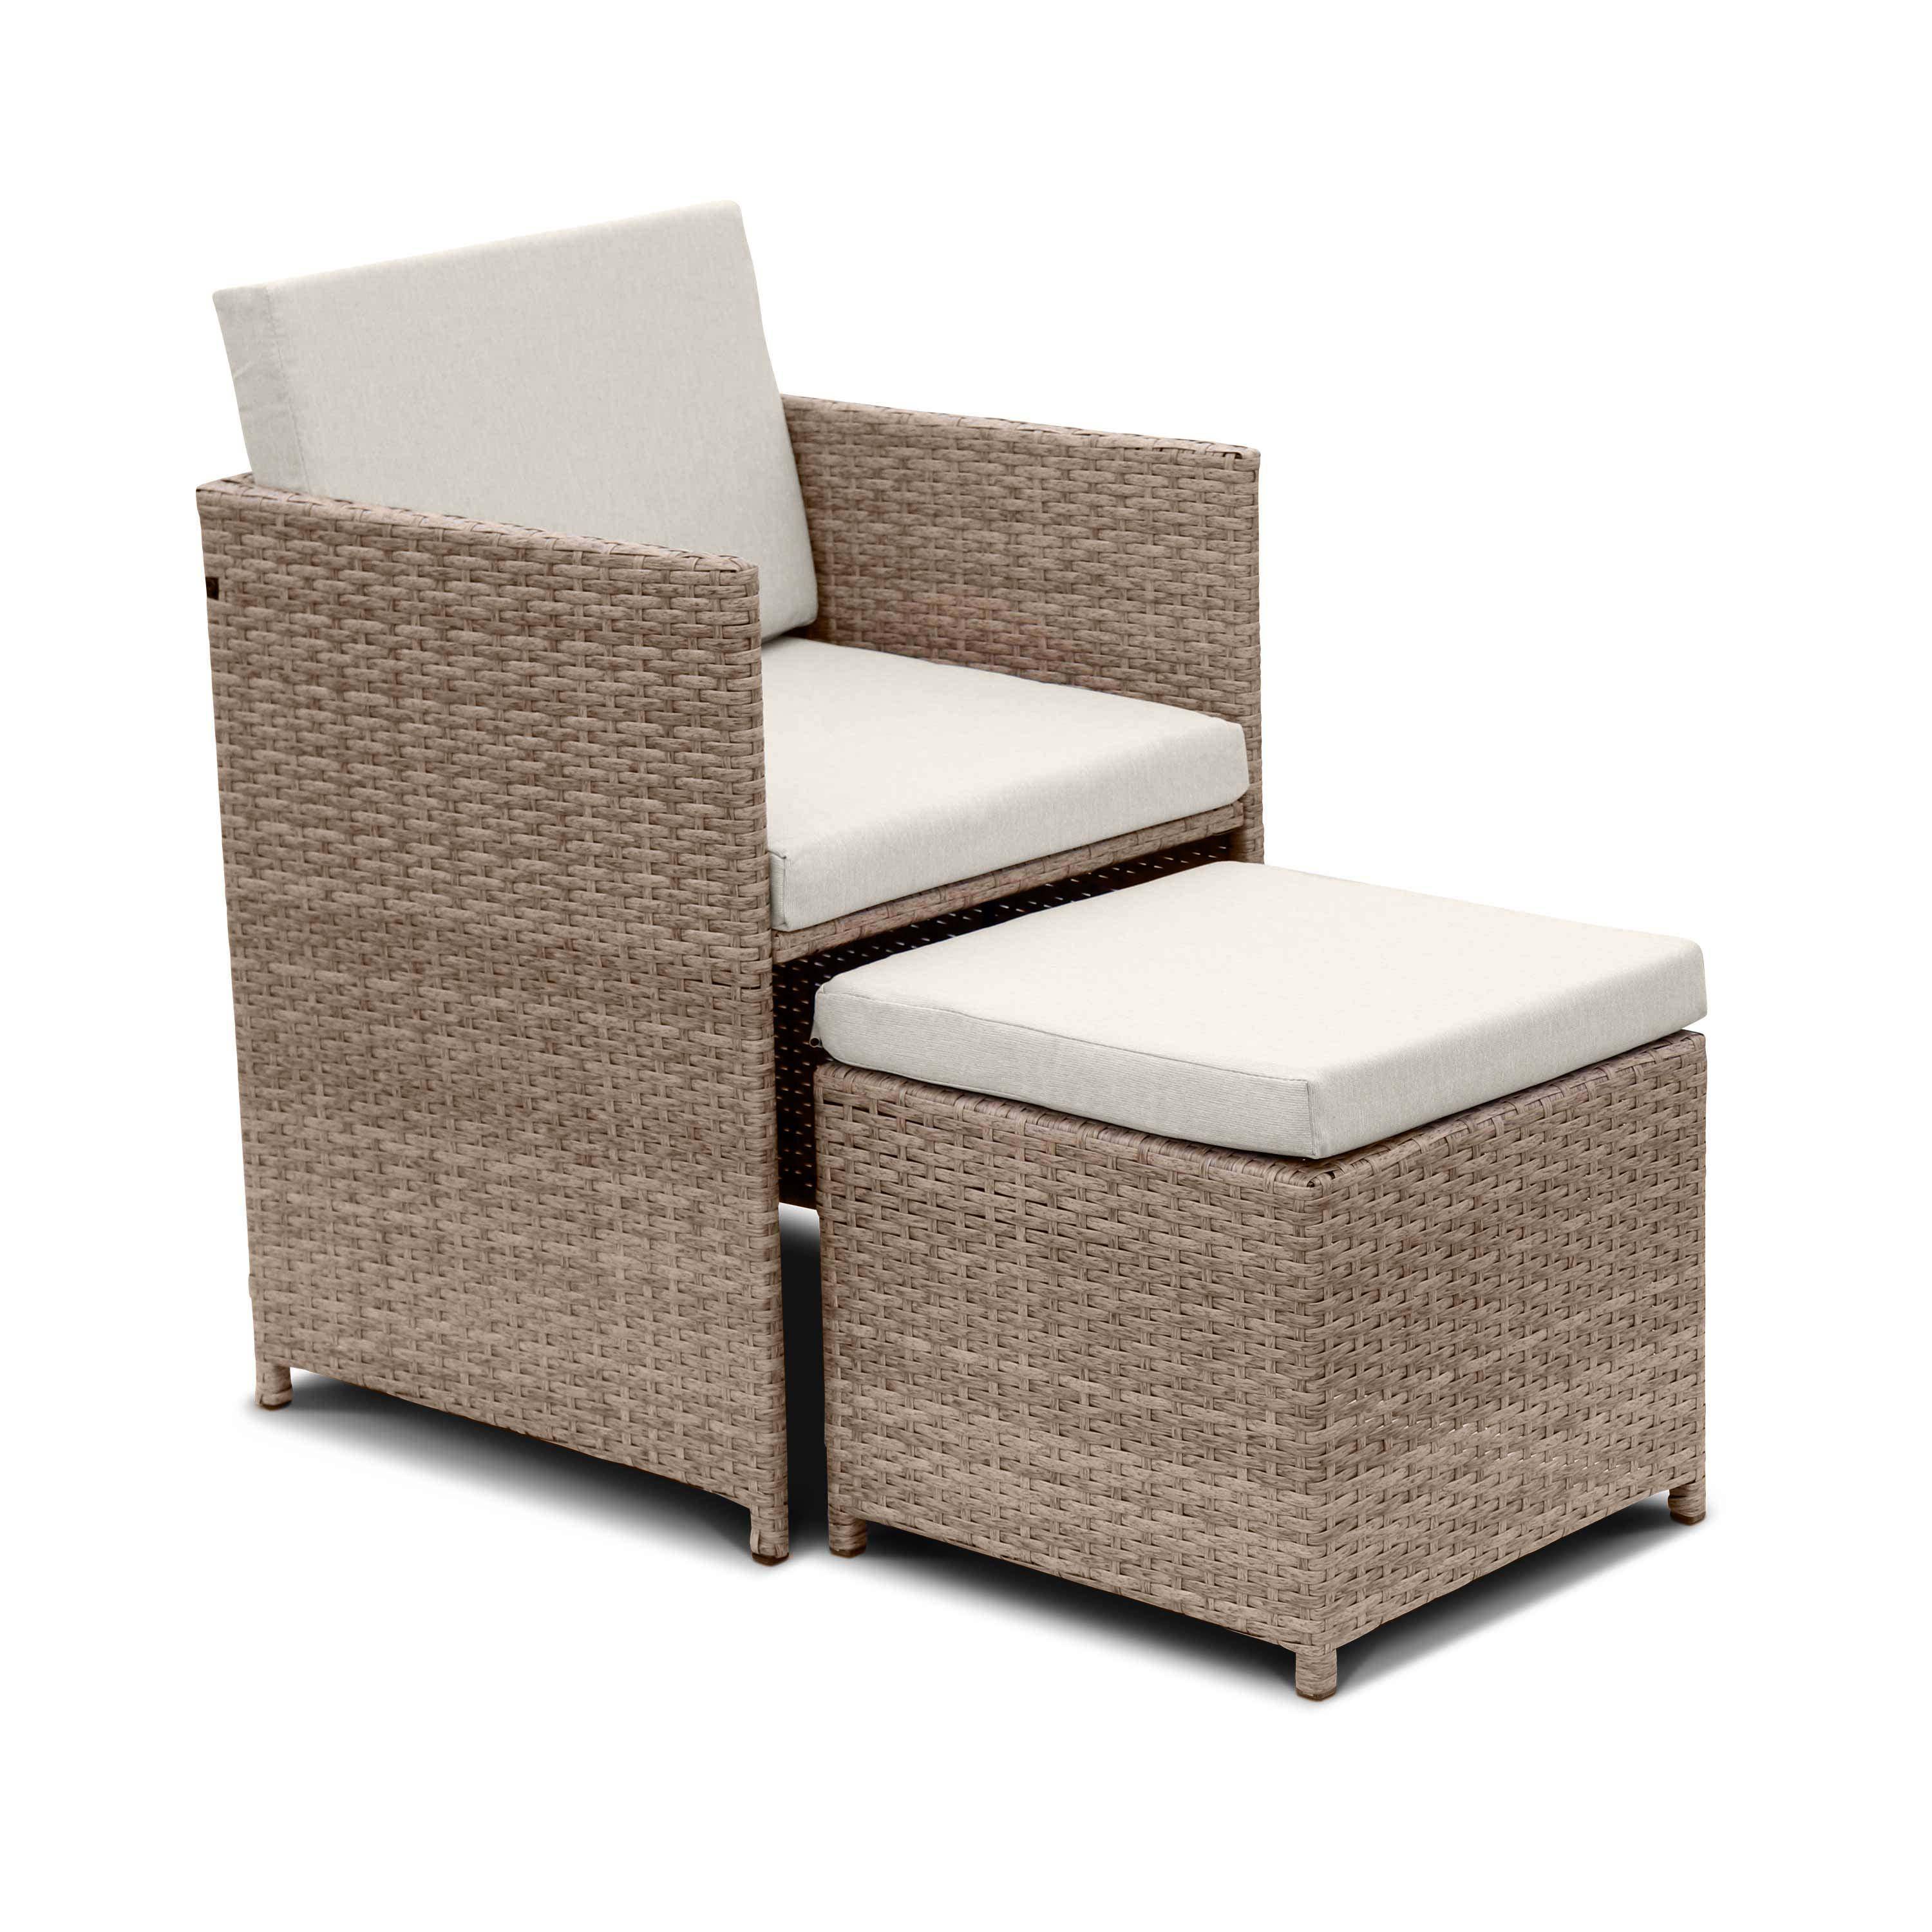 6 to 10-seater rattan cube table set - table, 6 armchairs, 2 footstools - Vabo 10 - Beige rattan, Beige cushions,sweeek,Photo5